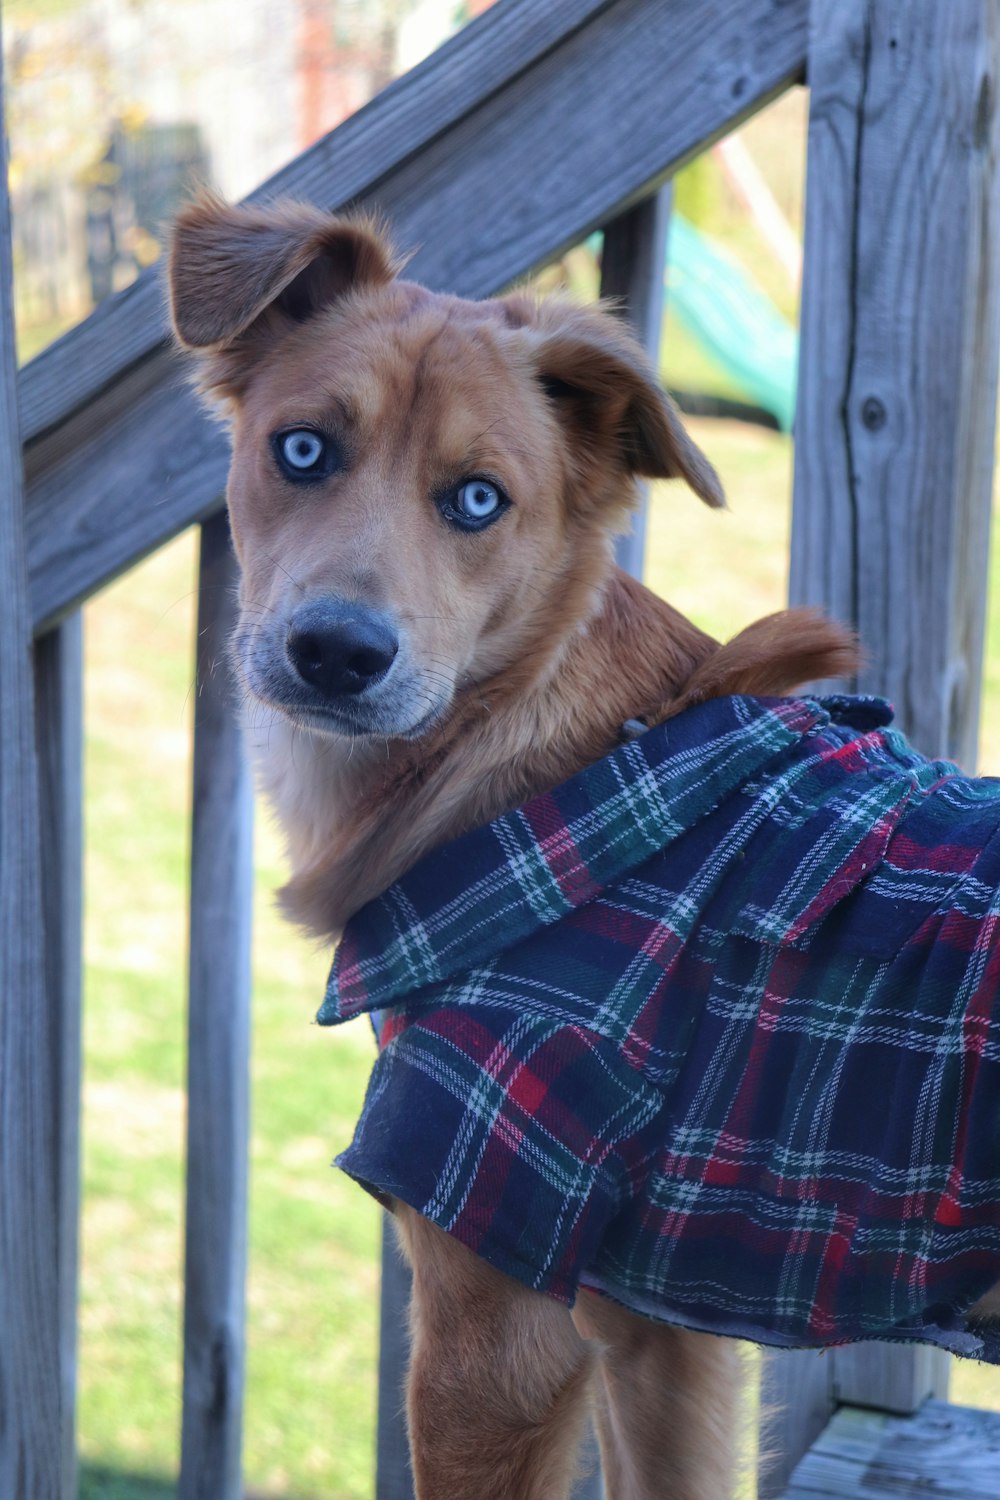 brown short coated dog wearing blue white and red plaid shirt